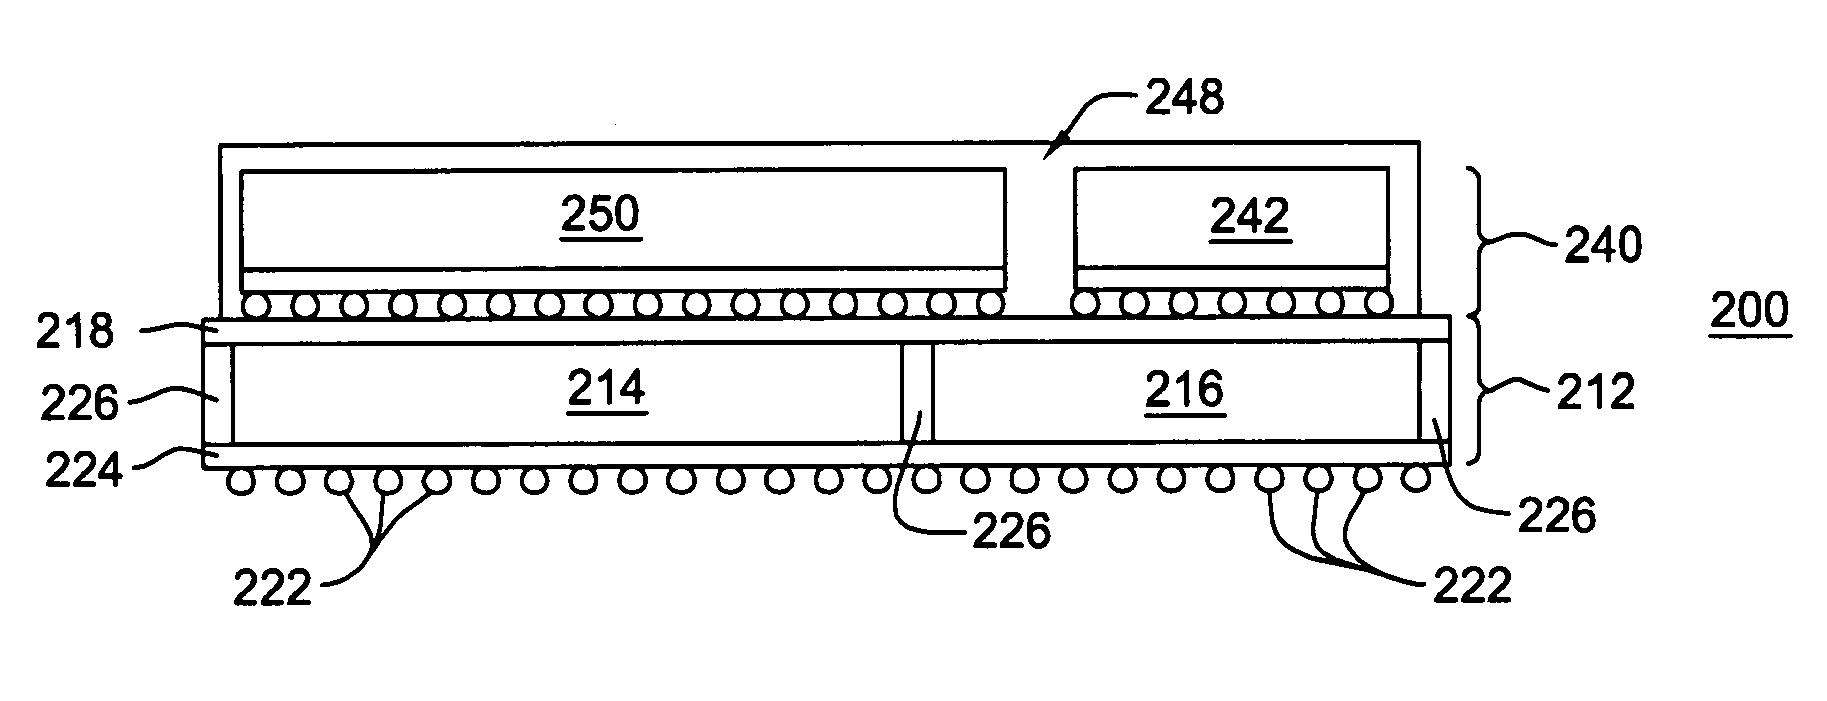 Integrated conductive structures and fabrication methods thereof facilitating implementing a cell phone or other electronic system